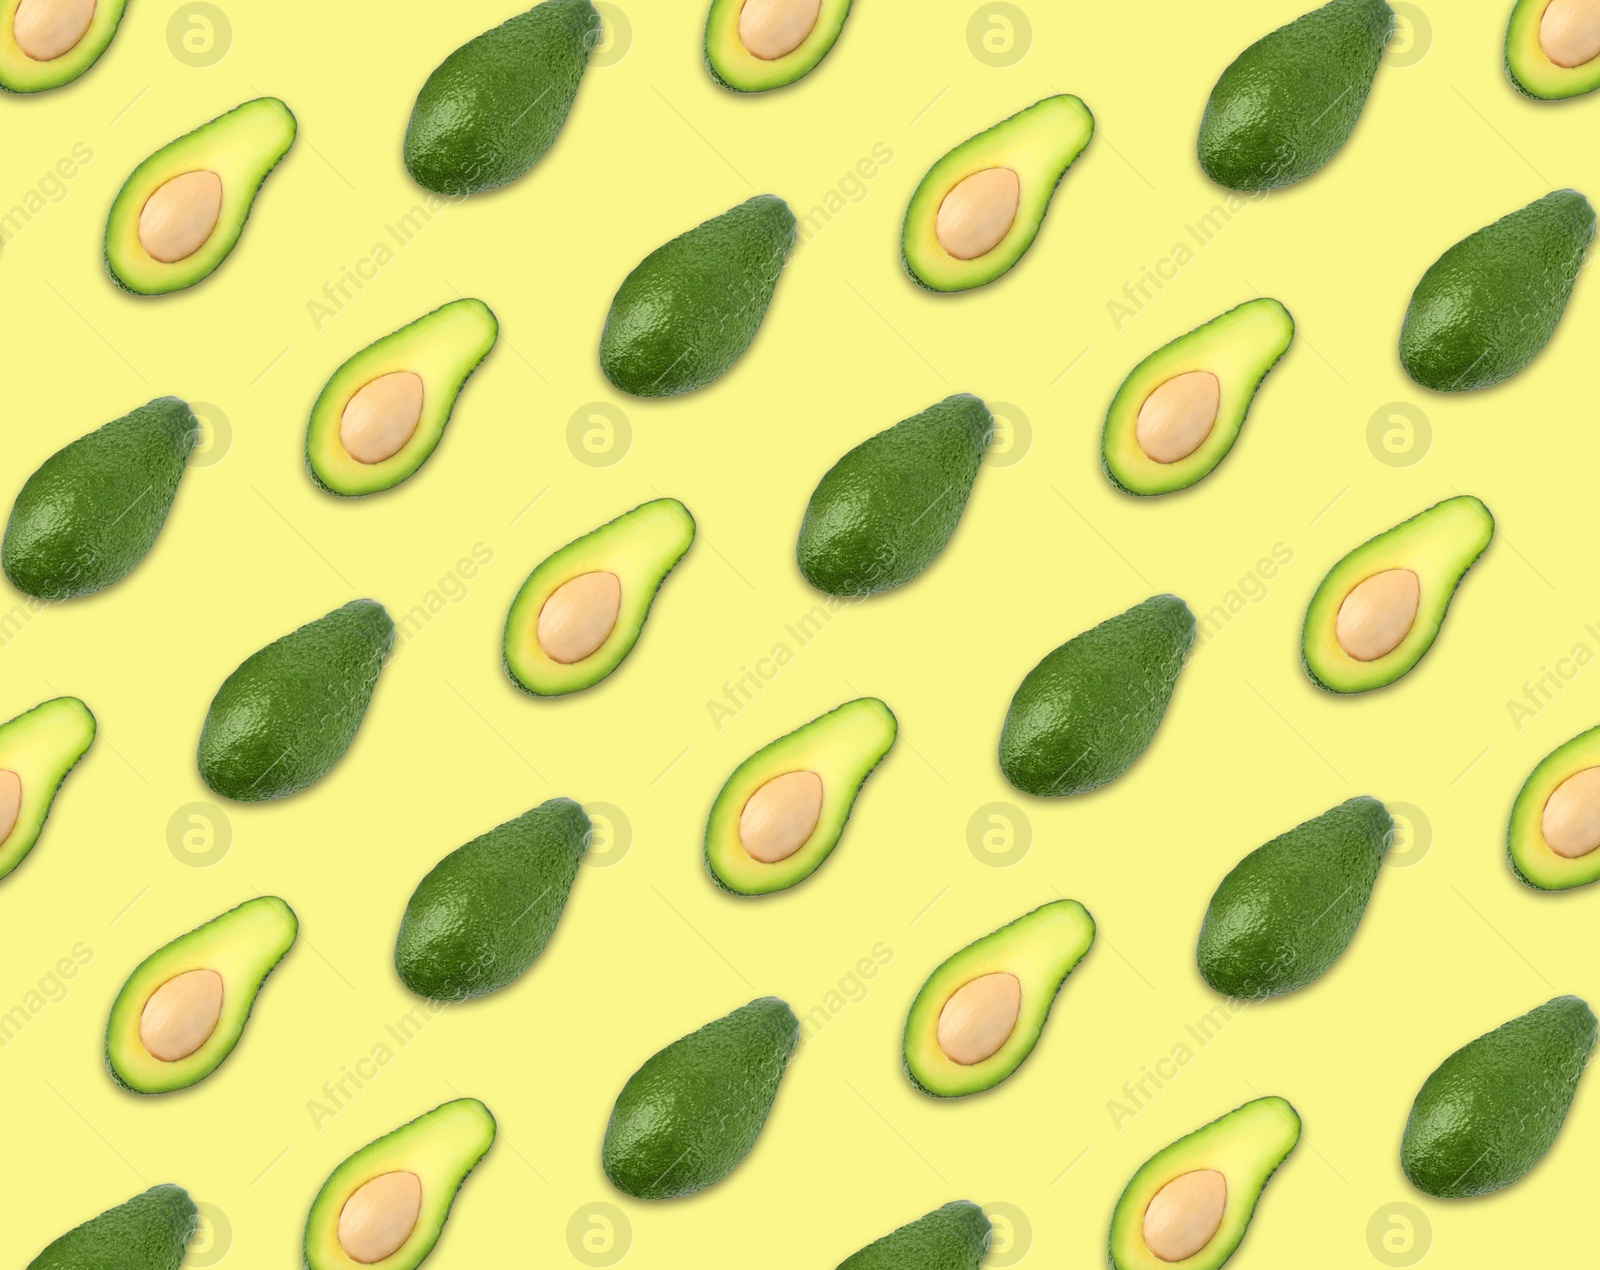 Image of Pattern of whole and halved avocados on pale yellow background